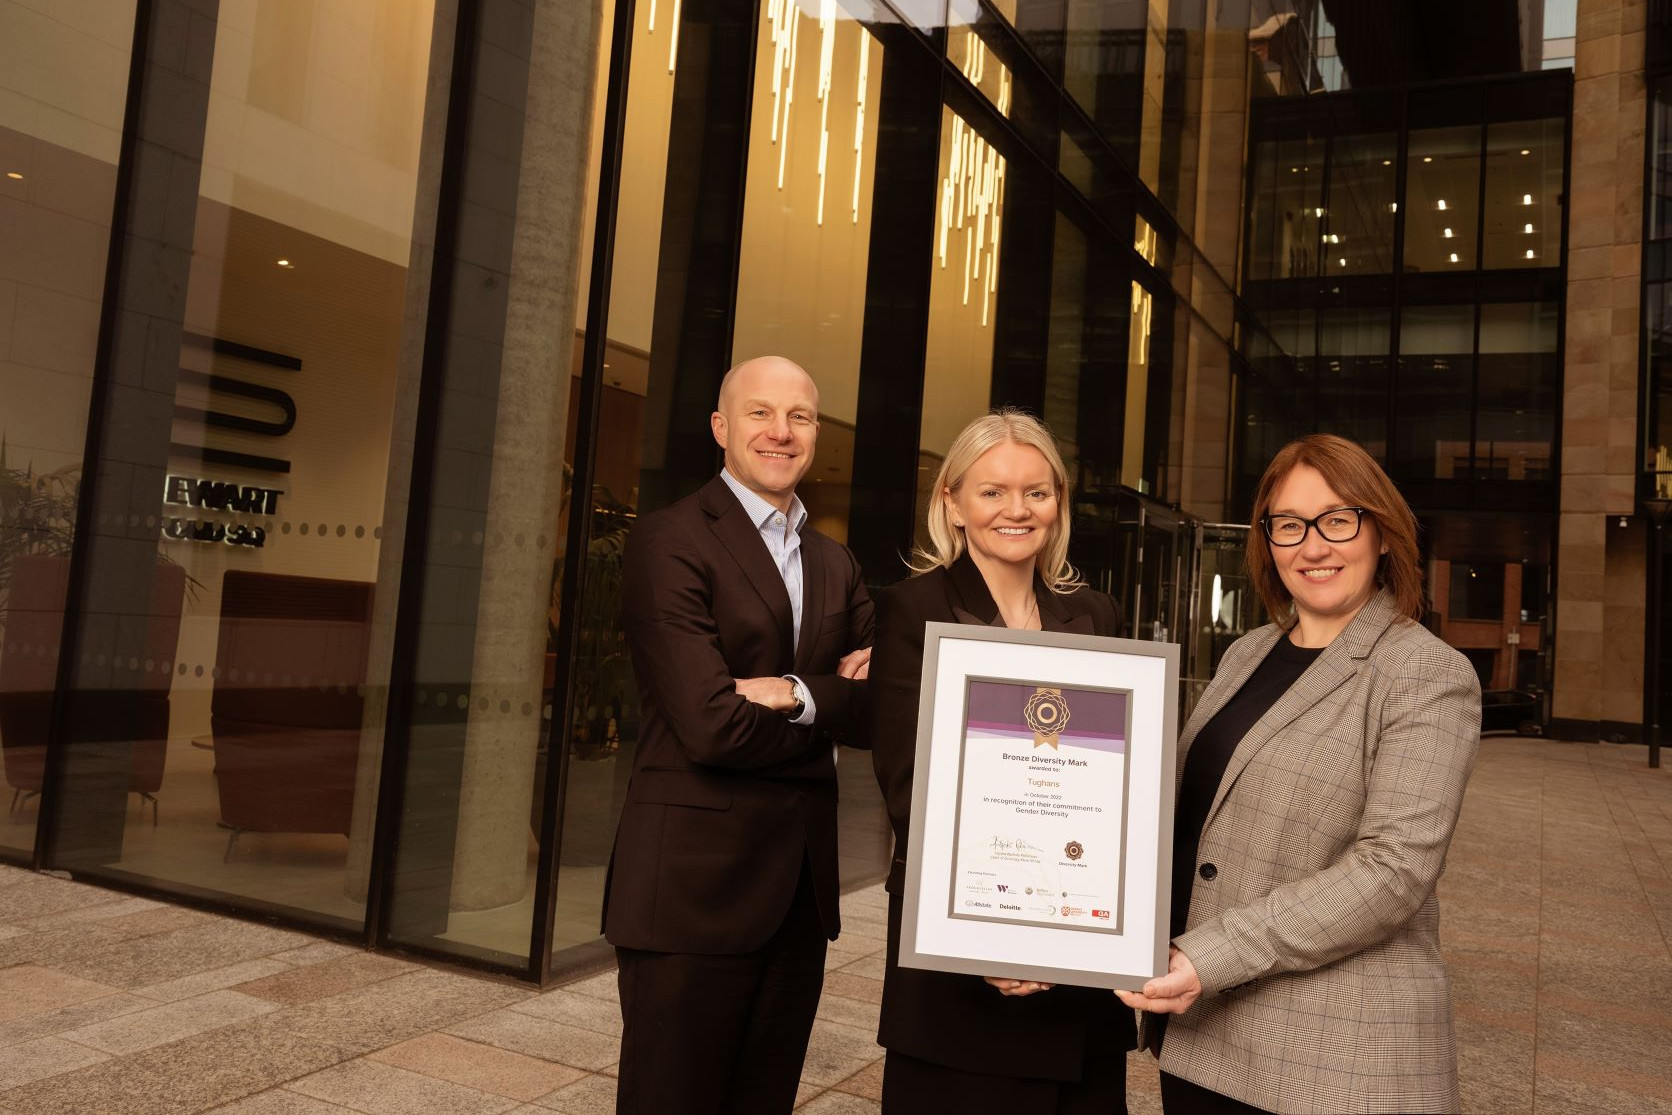 Tughans recognised for commitment to diversity and inclusion